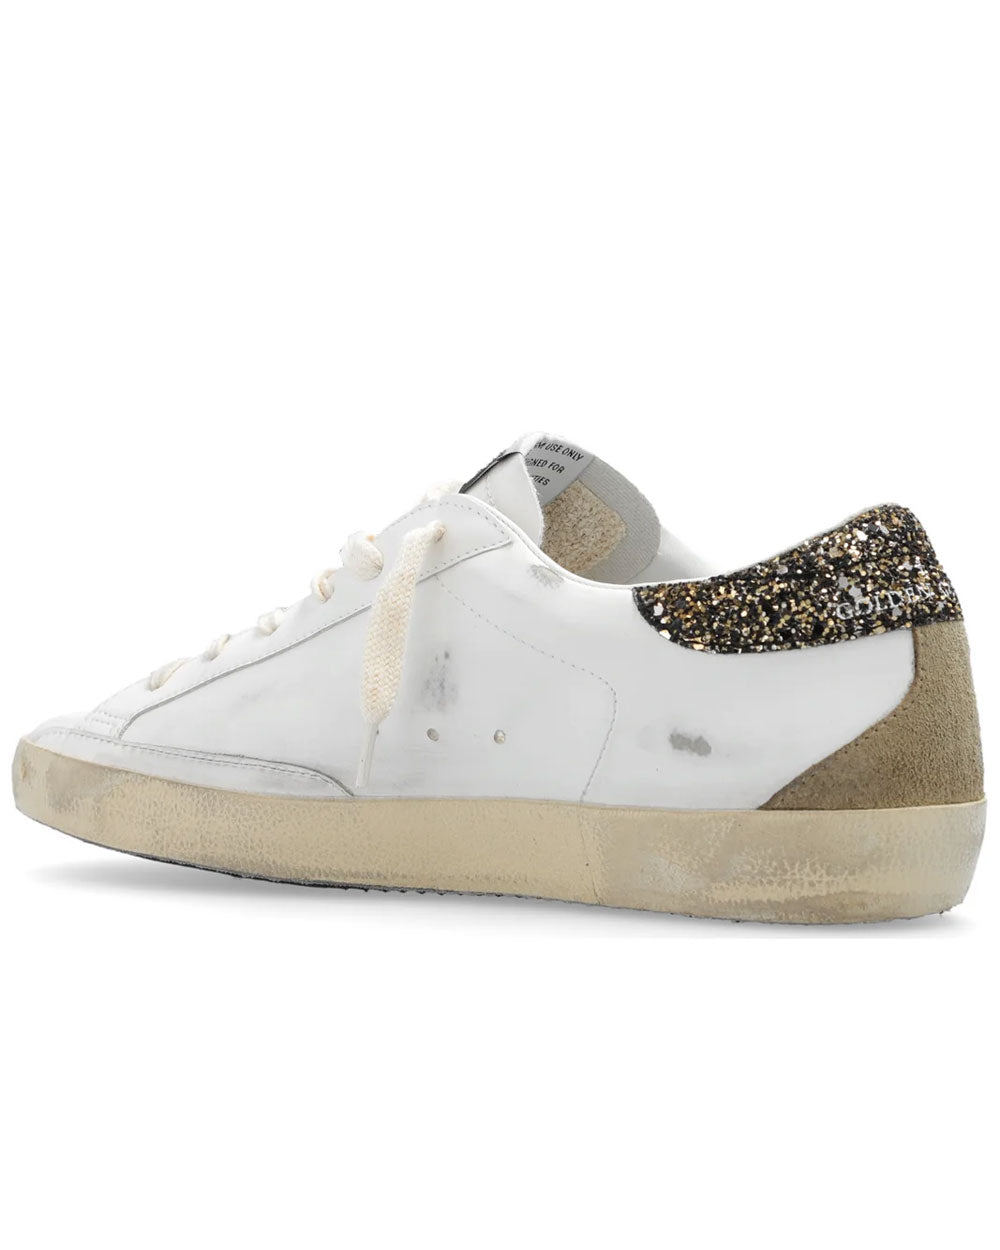 Super-Star Mixed Leather Low Top Sneakers in Black and Gold